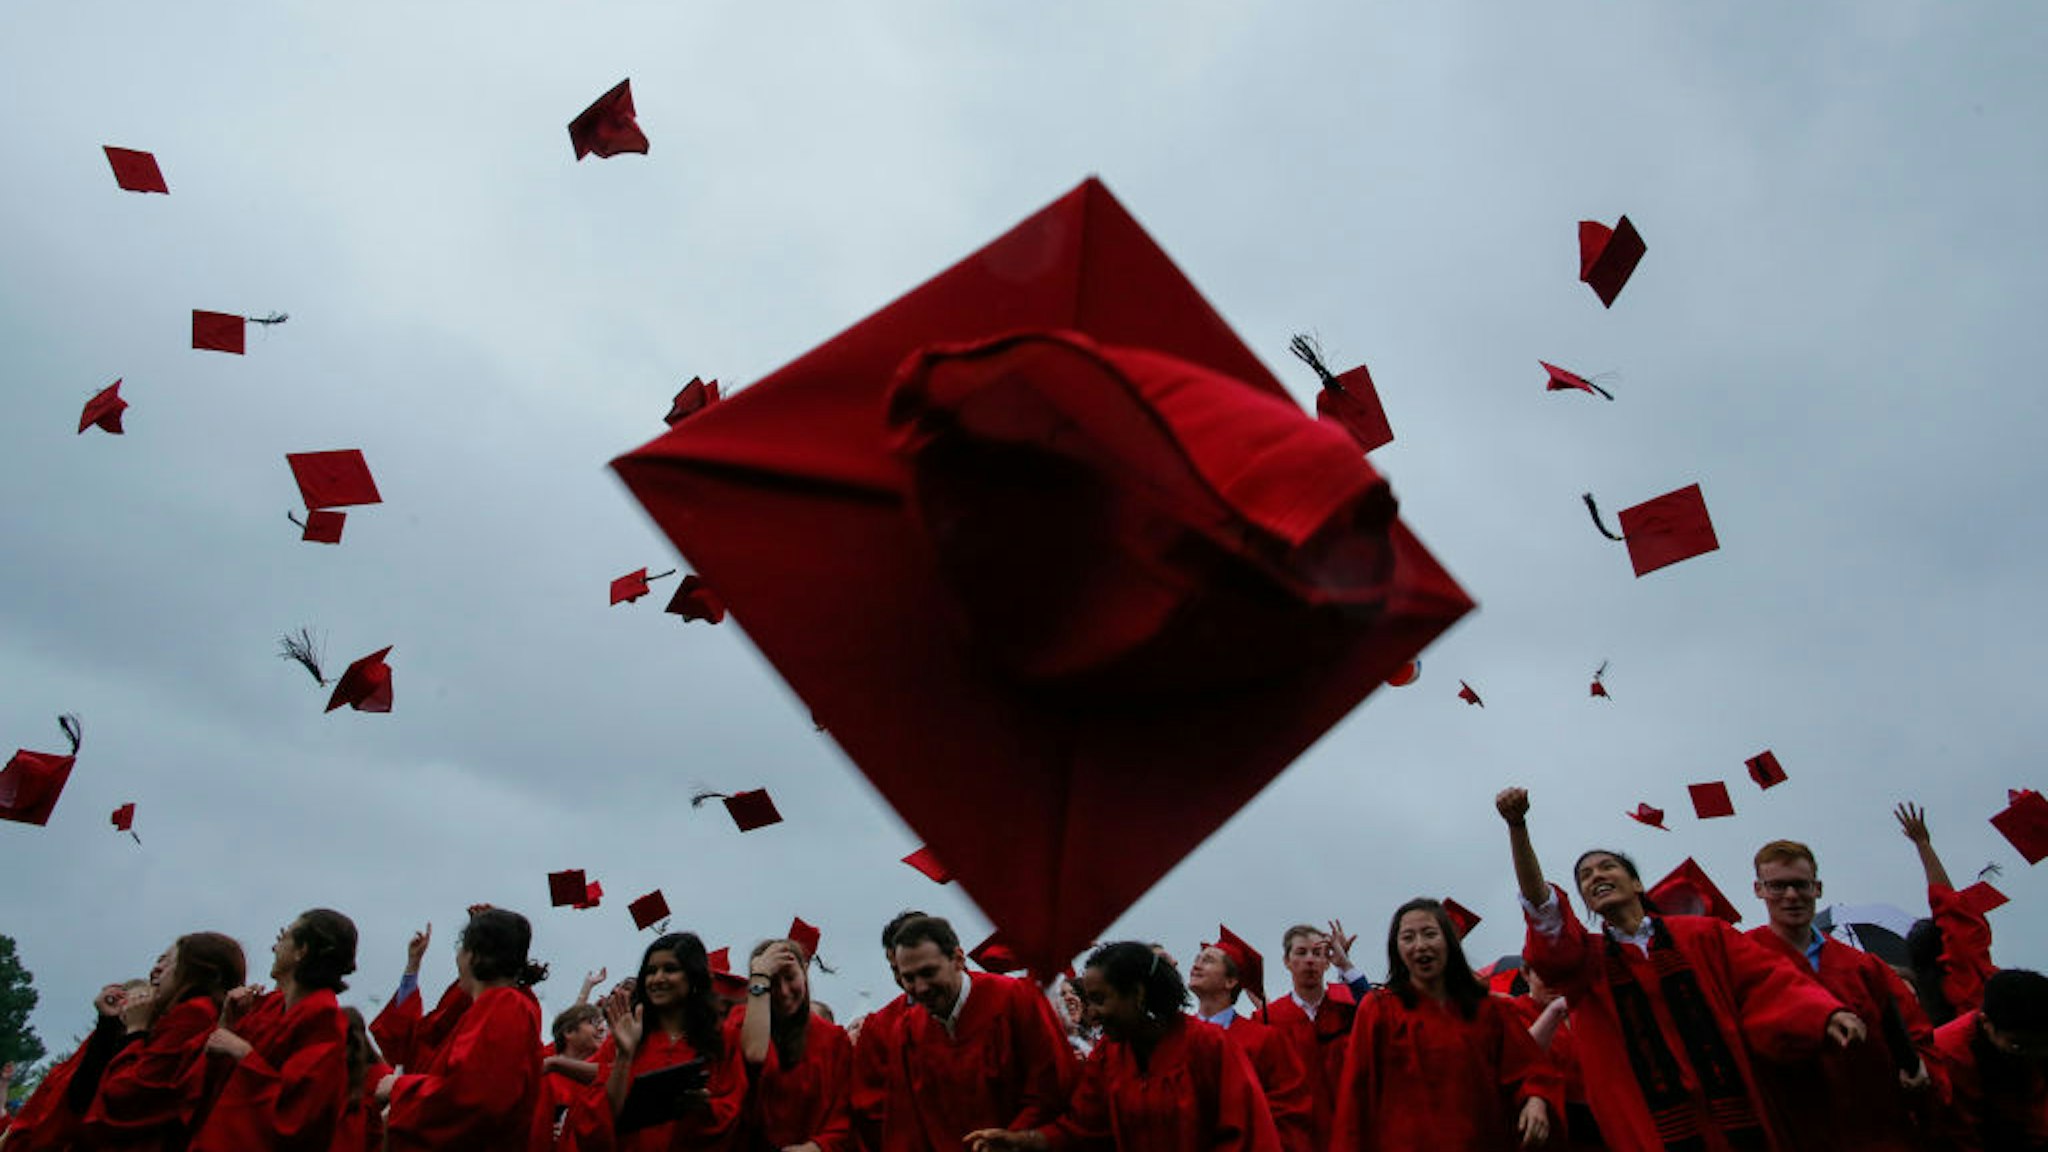 MIDDLETOWN, CT - MAY 27: Students toss their hats in the air at the conclusion of their Wesleyan commencement ceremony on May 27, 2018 at Wesleyan University in Middletown, Connecticut. Law professor Anita Hill spoke at the ceremony.